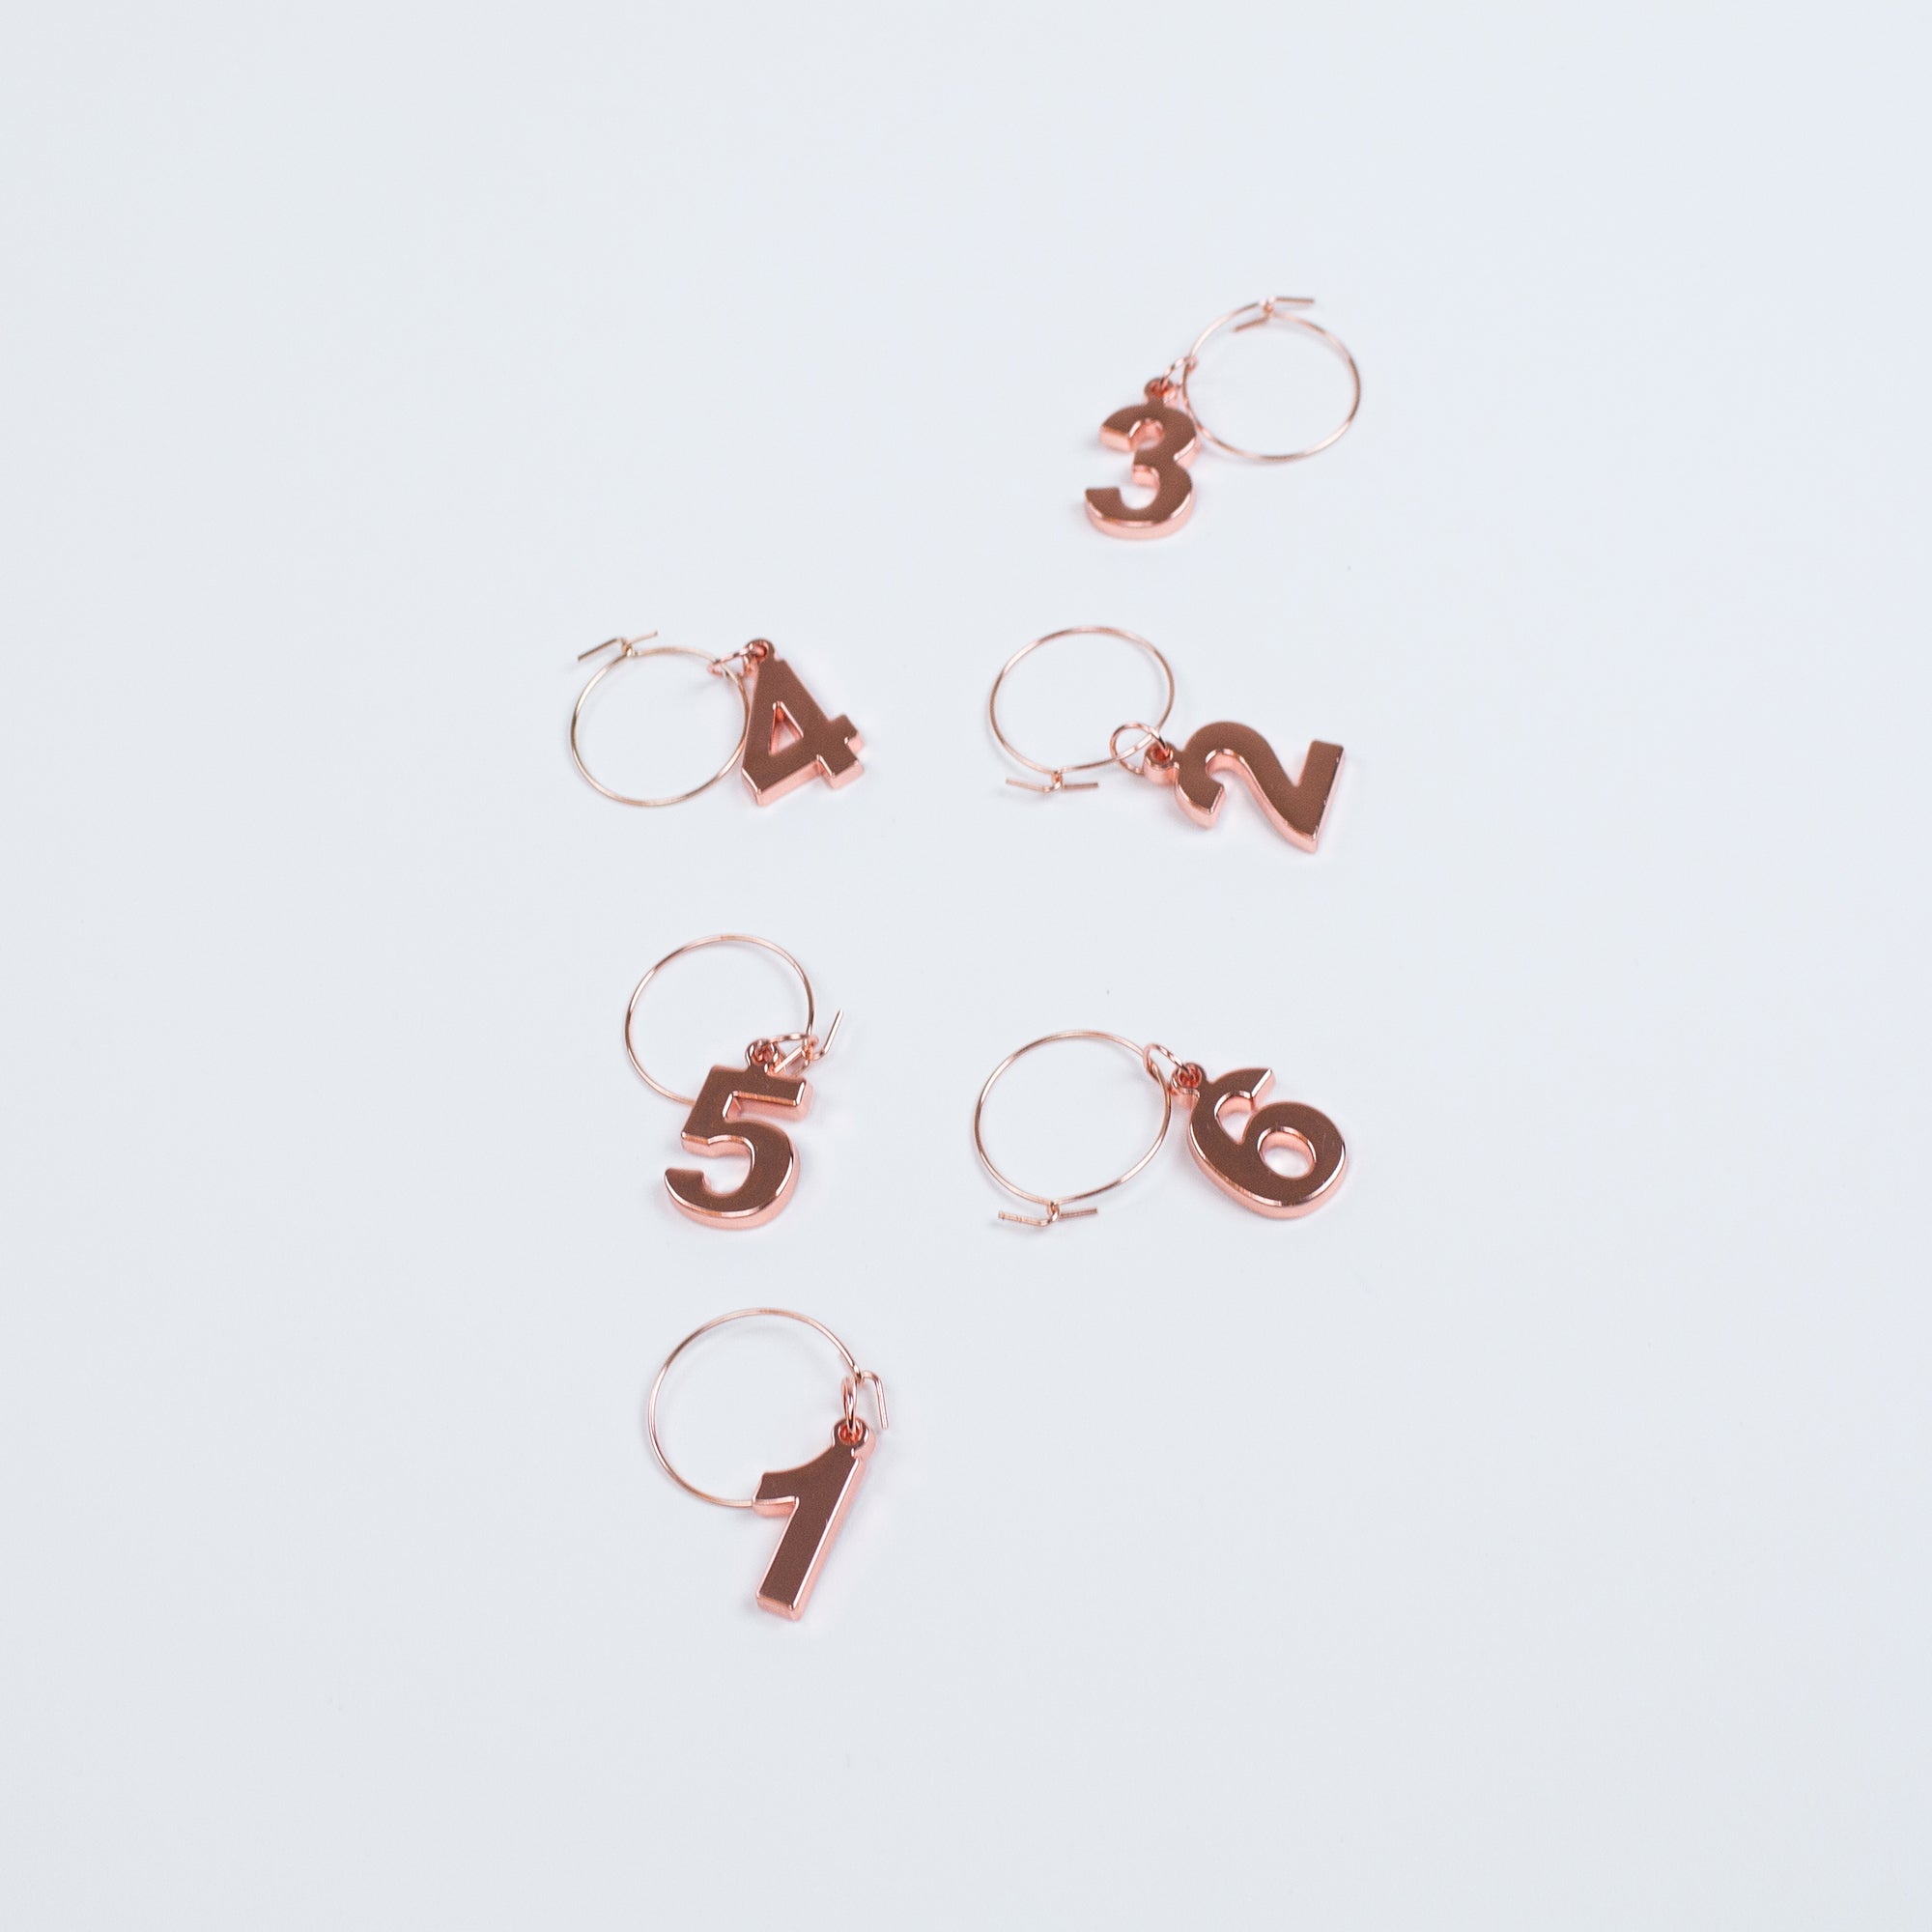 Copper Counting Wine Charms (Set of 6)